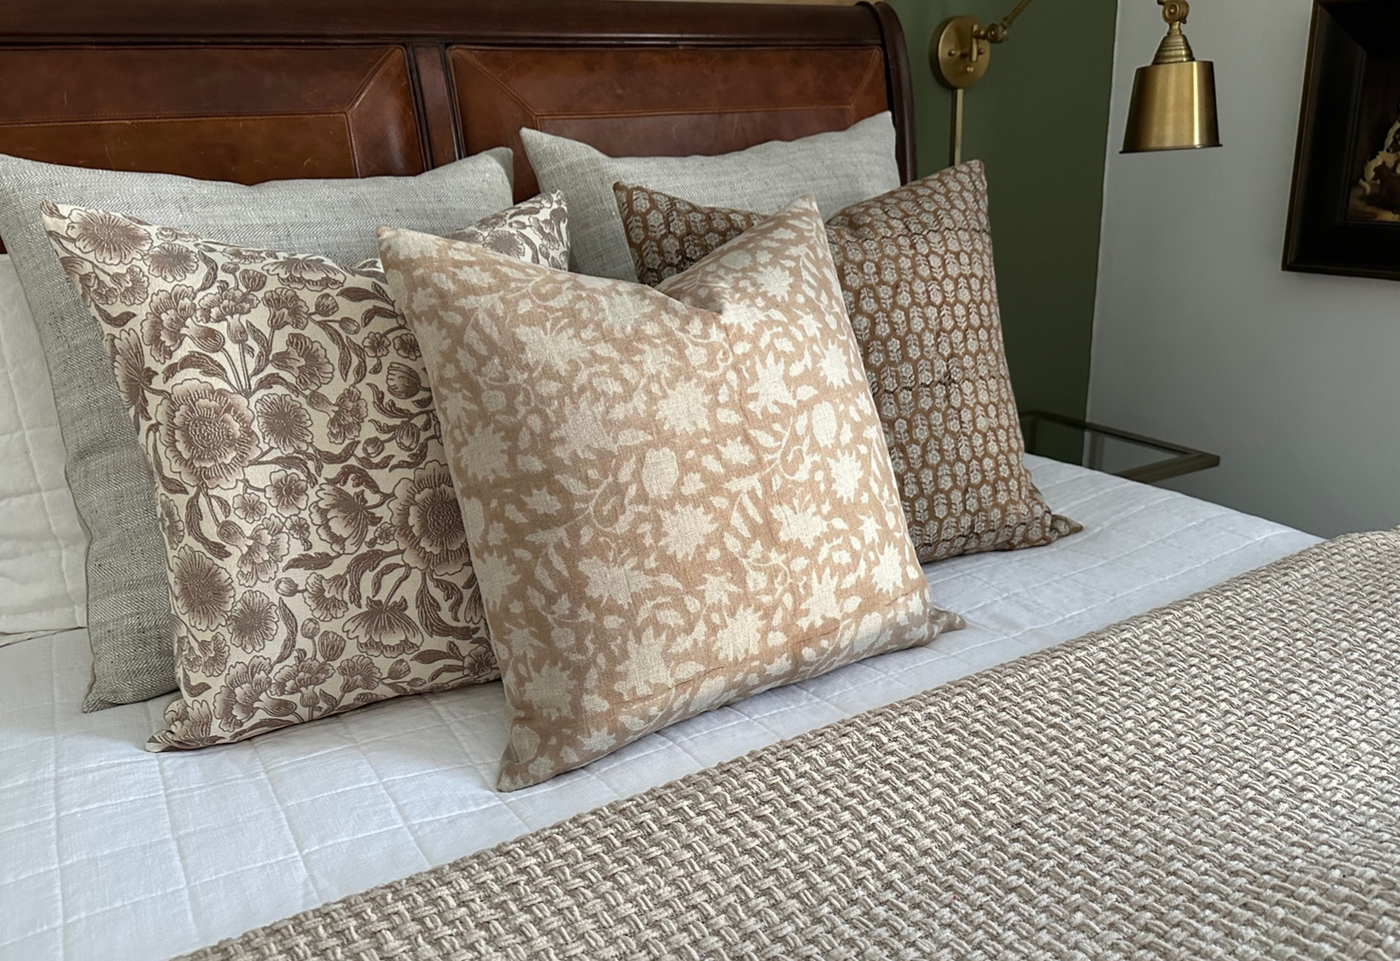 Ann | Coral-Brown Floral Block-Printed Linen Pillow Cover